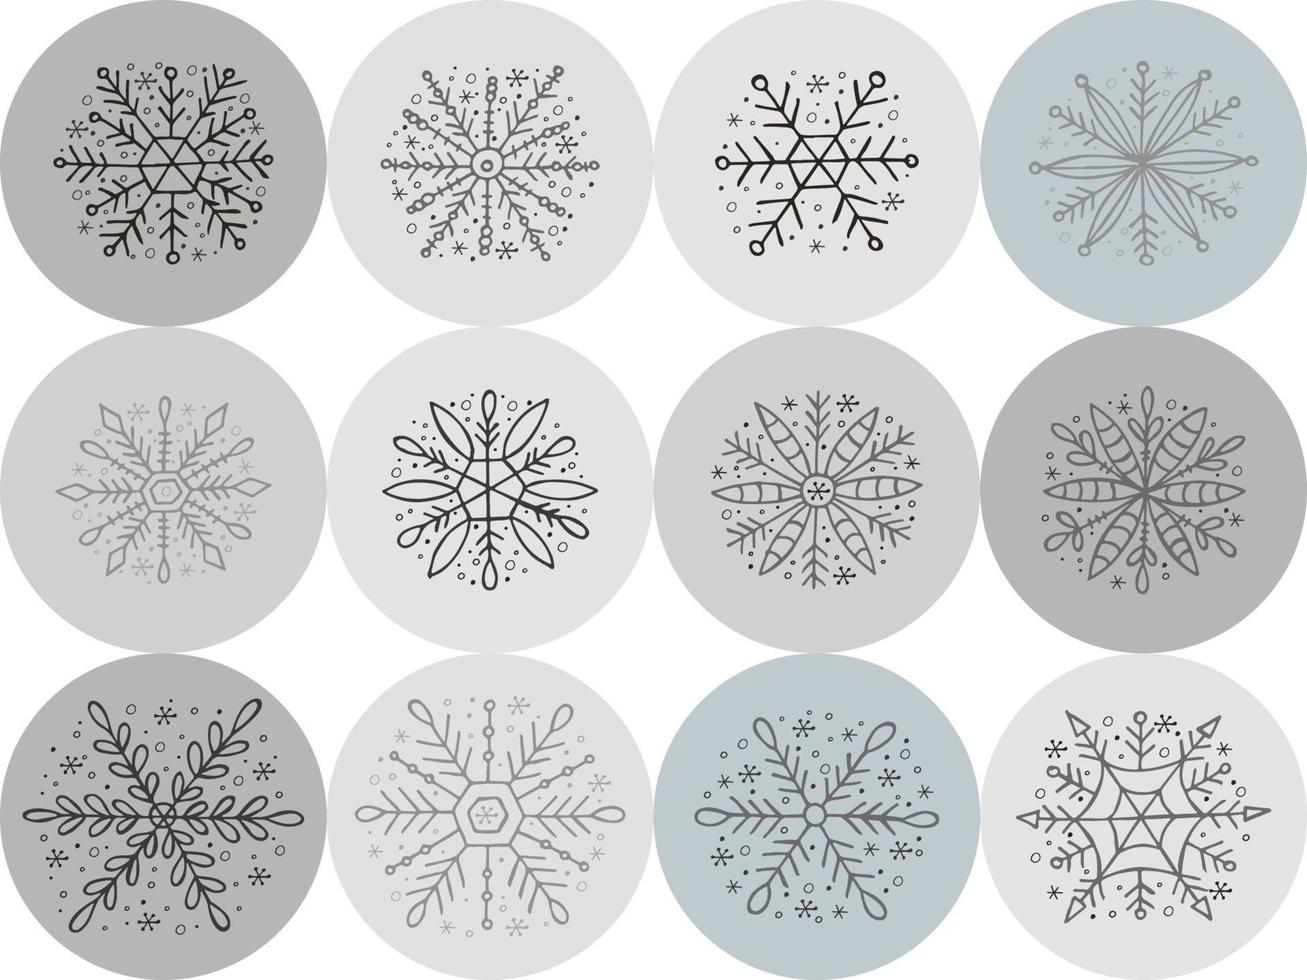 A set of hand-drawn snowflakes. Vector illustration in doodle style. Winter mood. Hello 2023. Merry Christmas and Happy New Year. Black and gray elements on a gray background.